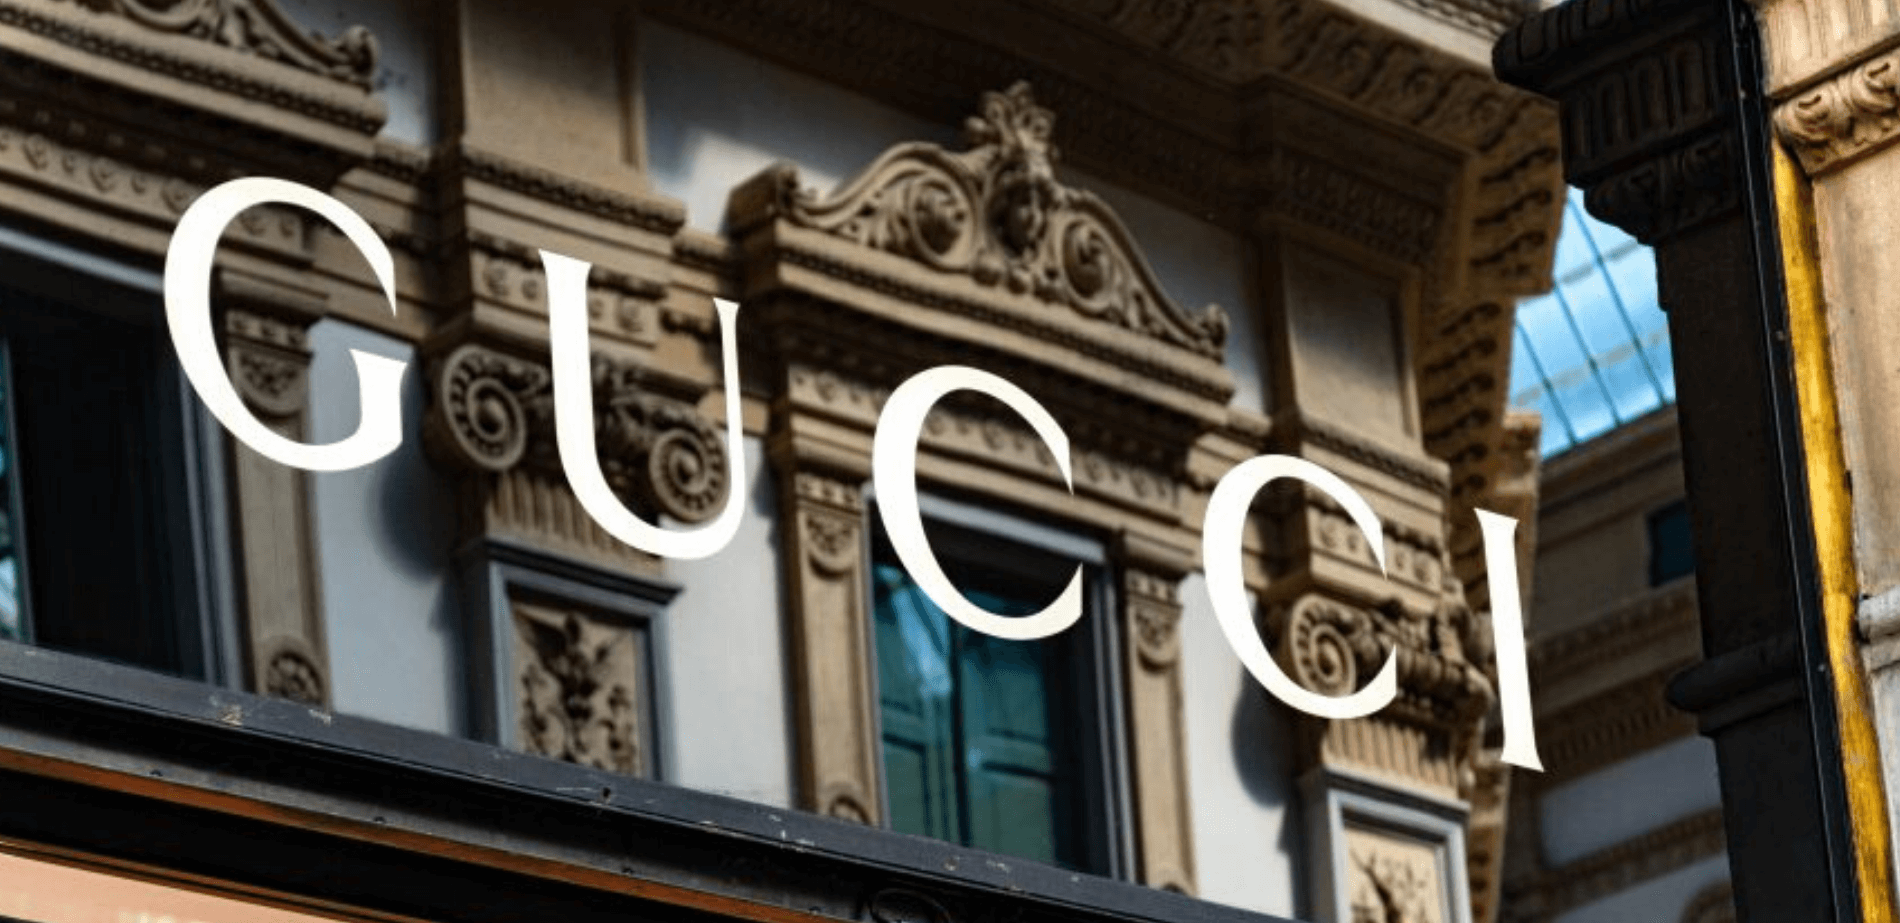 Gucci hires diversity chief after criticism over insensitive